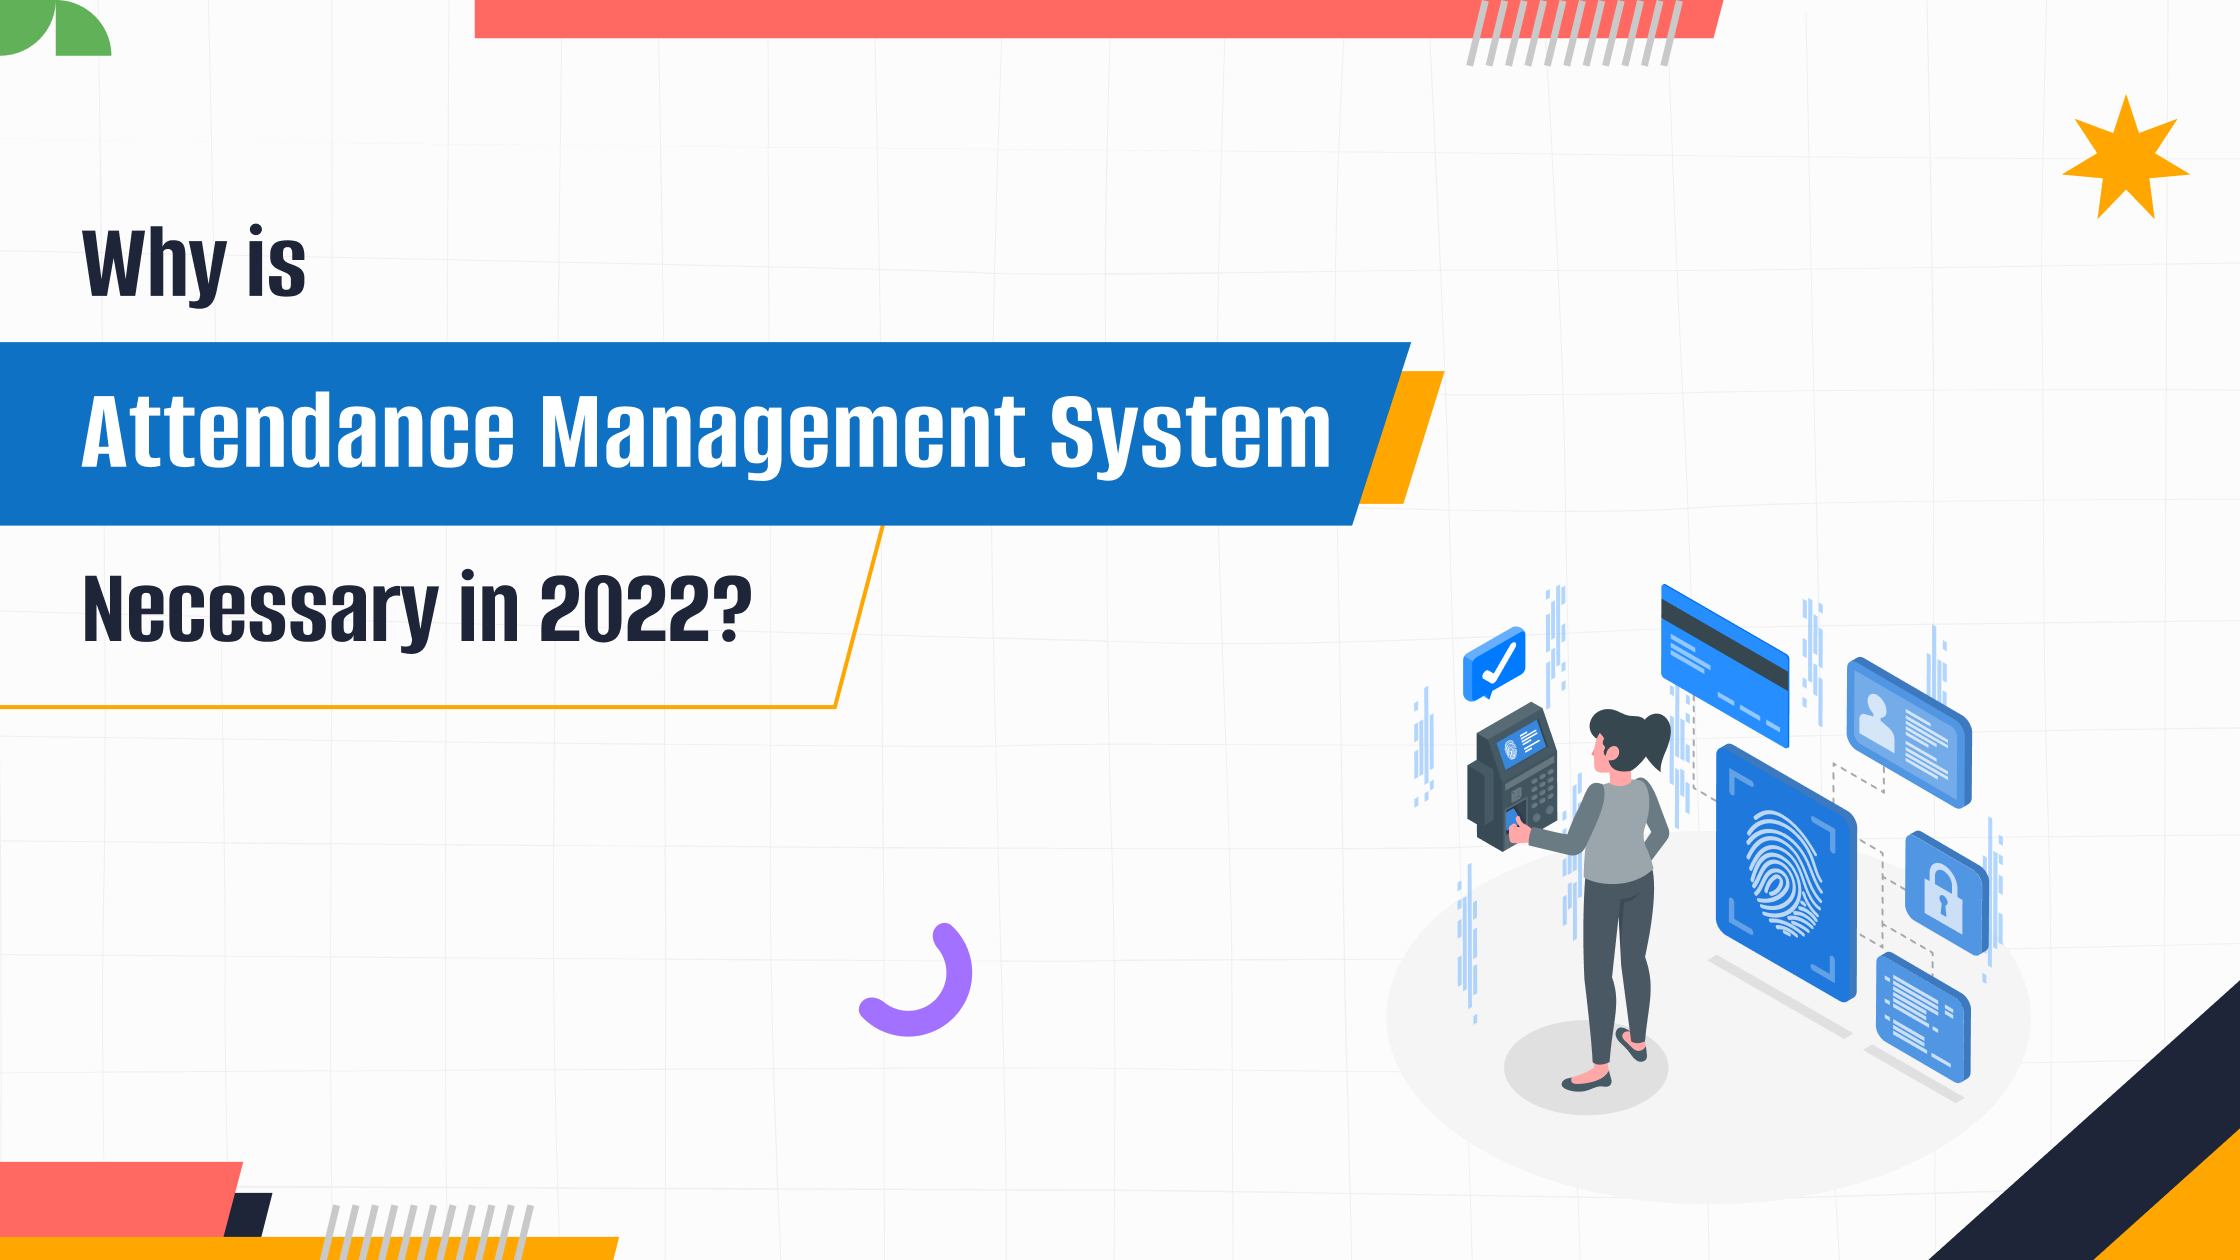 Why is Attendance Management System Necessary in 2022